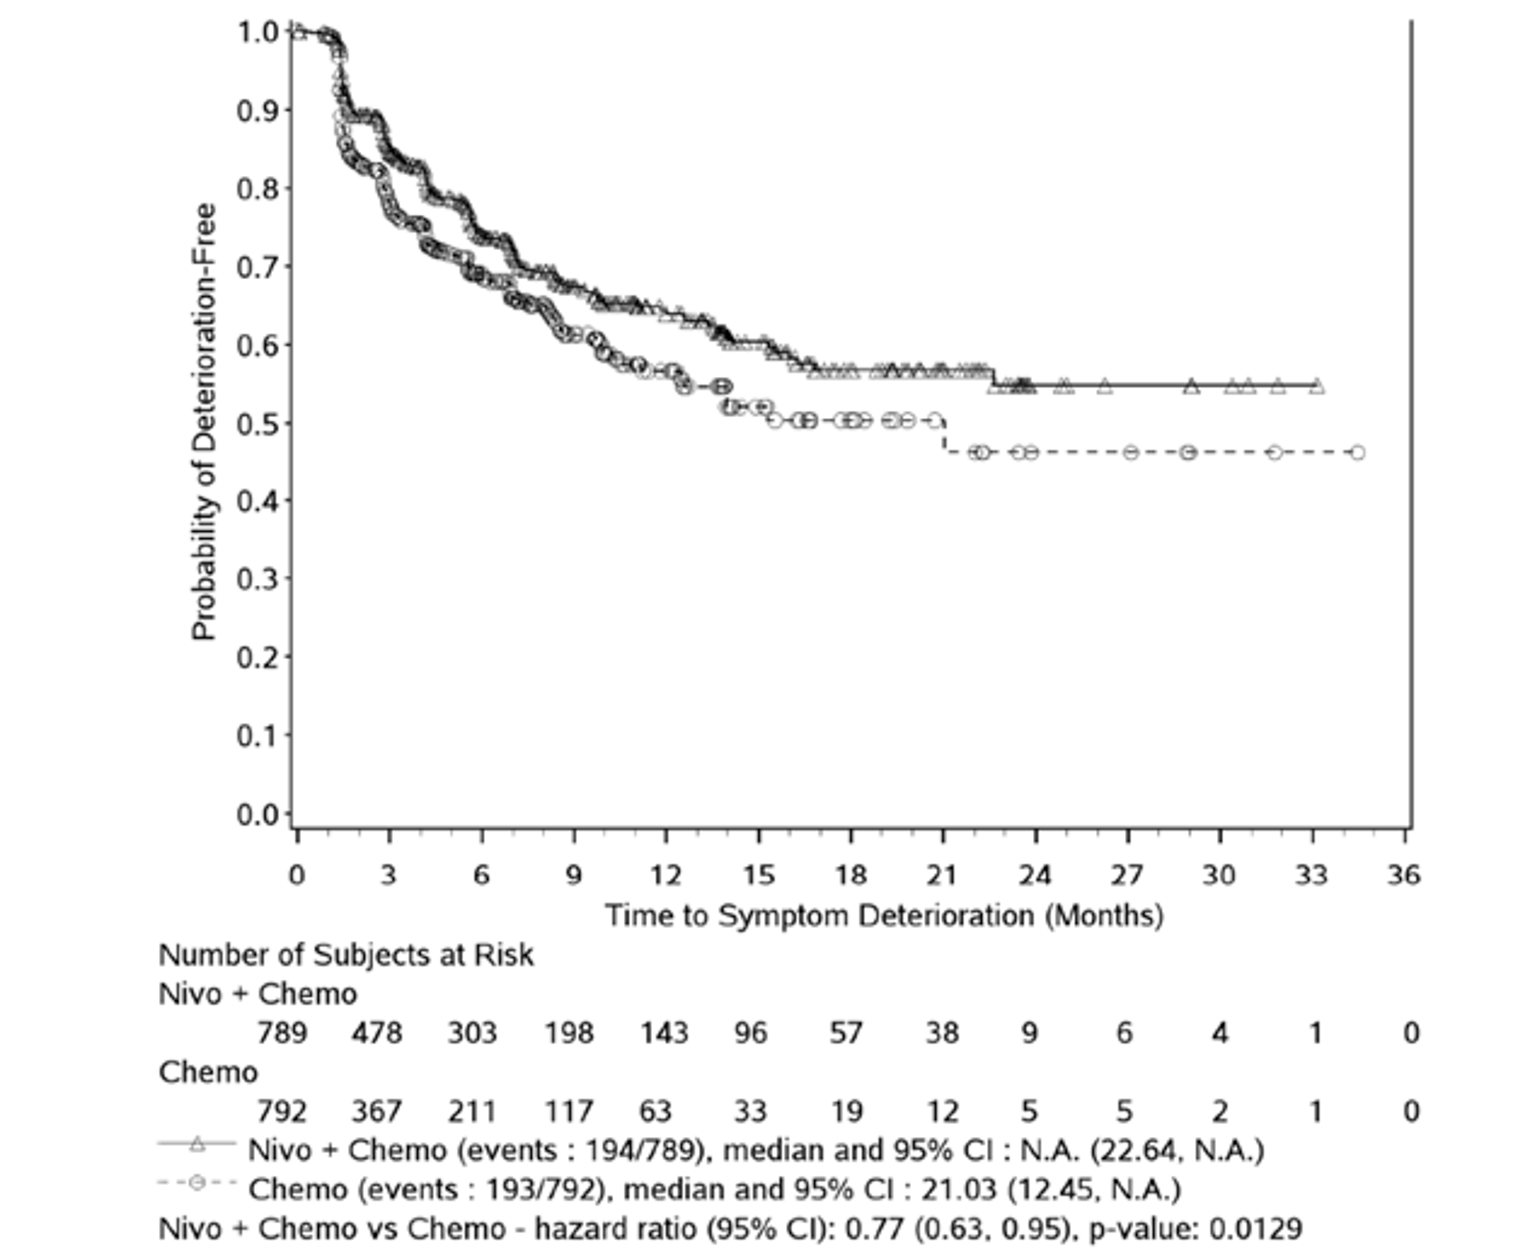 In this Kaplan-Meier analysis of TTSD among all randomized patients in the CheckMate-649 trial, approximately 50% of patients receiving chemotherapy met the criteria for symptom deterioration (decrease in GaCS score of ≥ 8.2 points from baseline) by 21 months. Median TTSD was not reached for patients receiving nivolumab plus chemotherapy; only approximately 40% of patients in this arm met the criteria for symptom deterioration. Median TTSD was 21.03 (95% CI, 12.45 to not calculable) months in the chemotherapy arm. The HR for comparison between arms was 0.77 (95% CI, 0.63 to 0.95). The number of at-risk patients receiving nivolumab plus chemotherapy at 0, 3, 6, 9, 12, 15, 18, 21, 24, 27, 30, 33, and 36 months was 789, 478, 303, 198, 143, 96, 57, 38, 9, 6, 4, 1, and 0, respectively. The number of at-risk patients receiving chemotherapy at 0, 3, 6, 9, 12, 15, 18, 21, 24, 27, 30, 33, and 36 months was 792, 367, 211, 117, 63, 33, 19, 12, 5, 5, 2, 1, and 0, respectively.